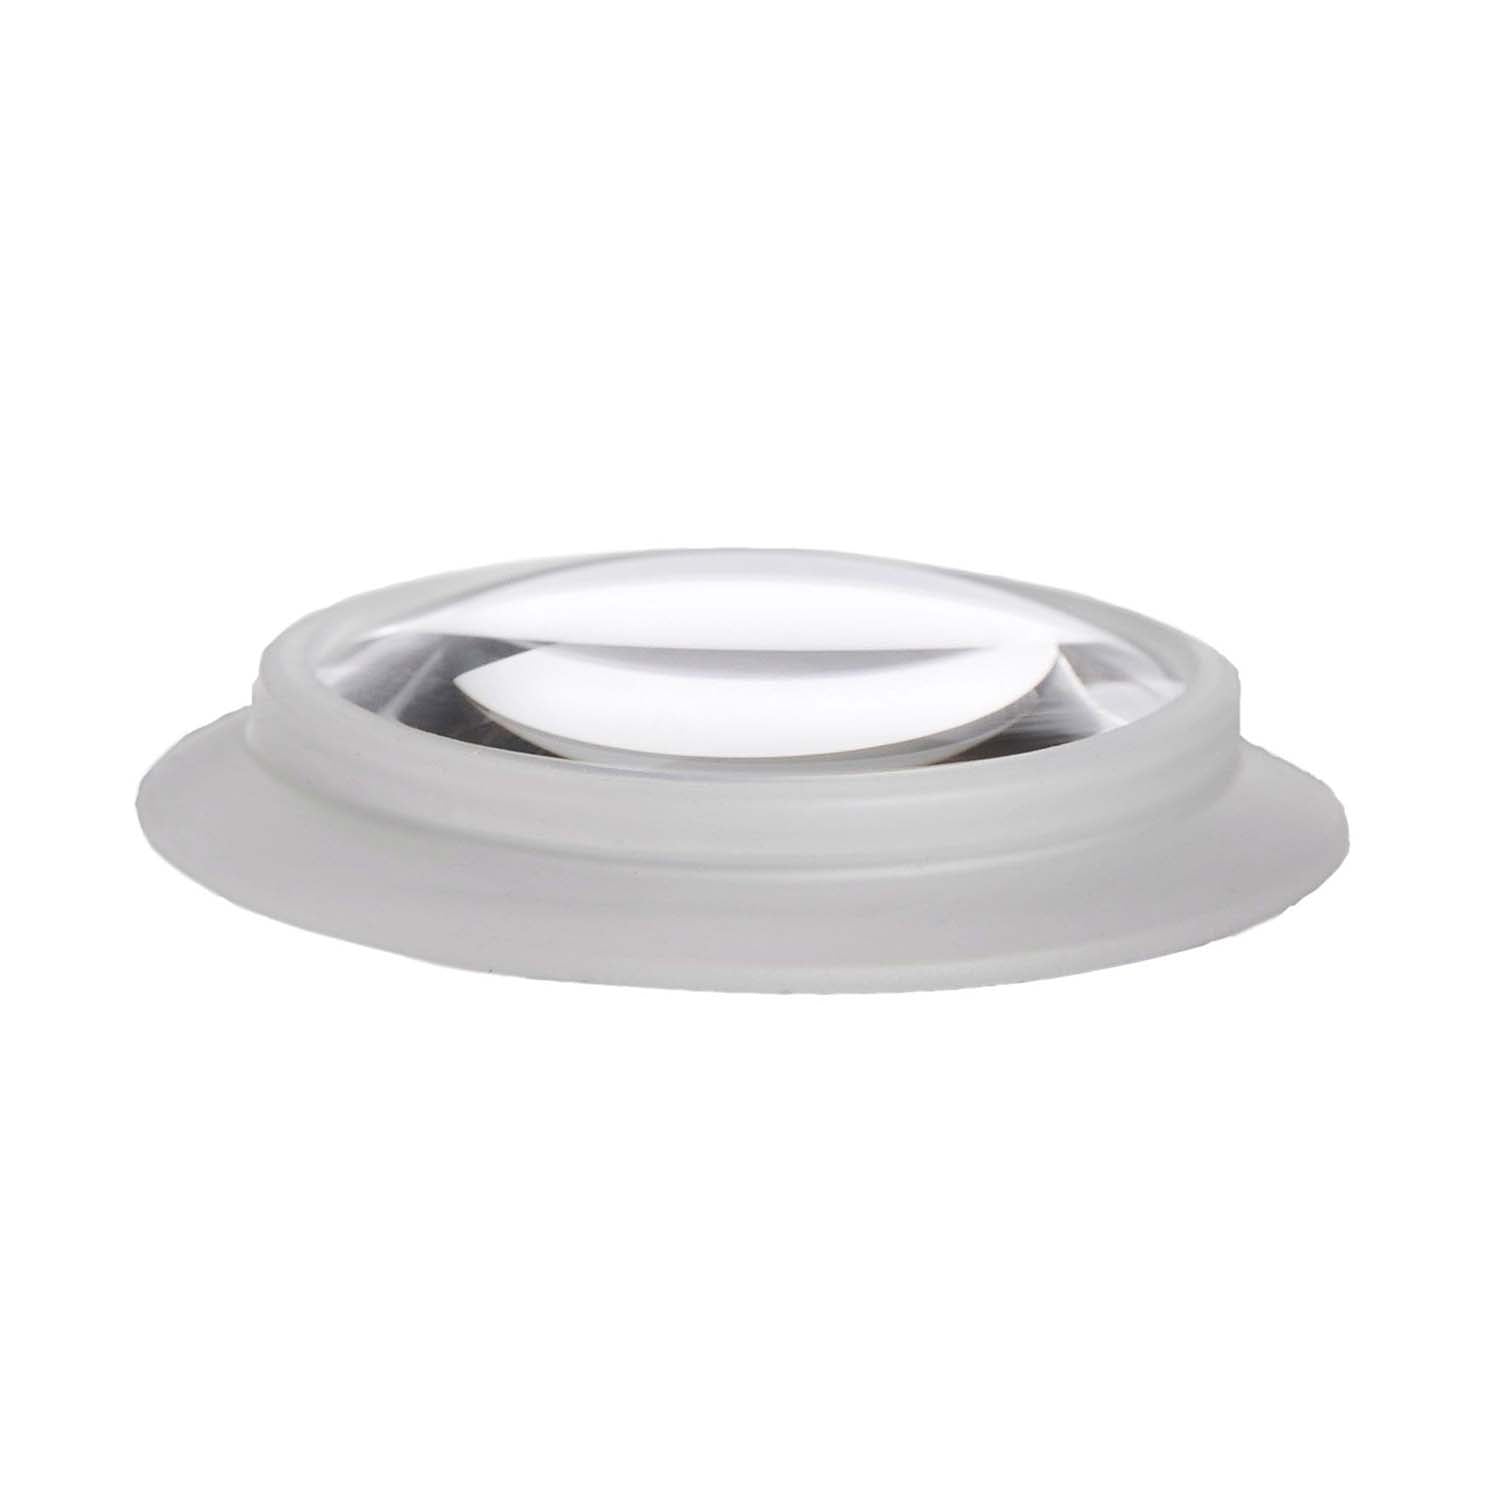 Circus LED Medical | 10d Suction Lens ONLY (Additional Lens)